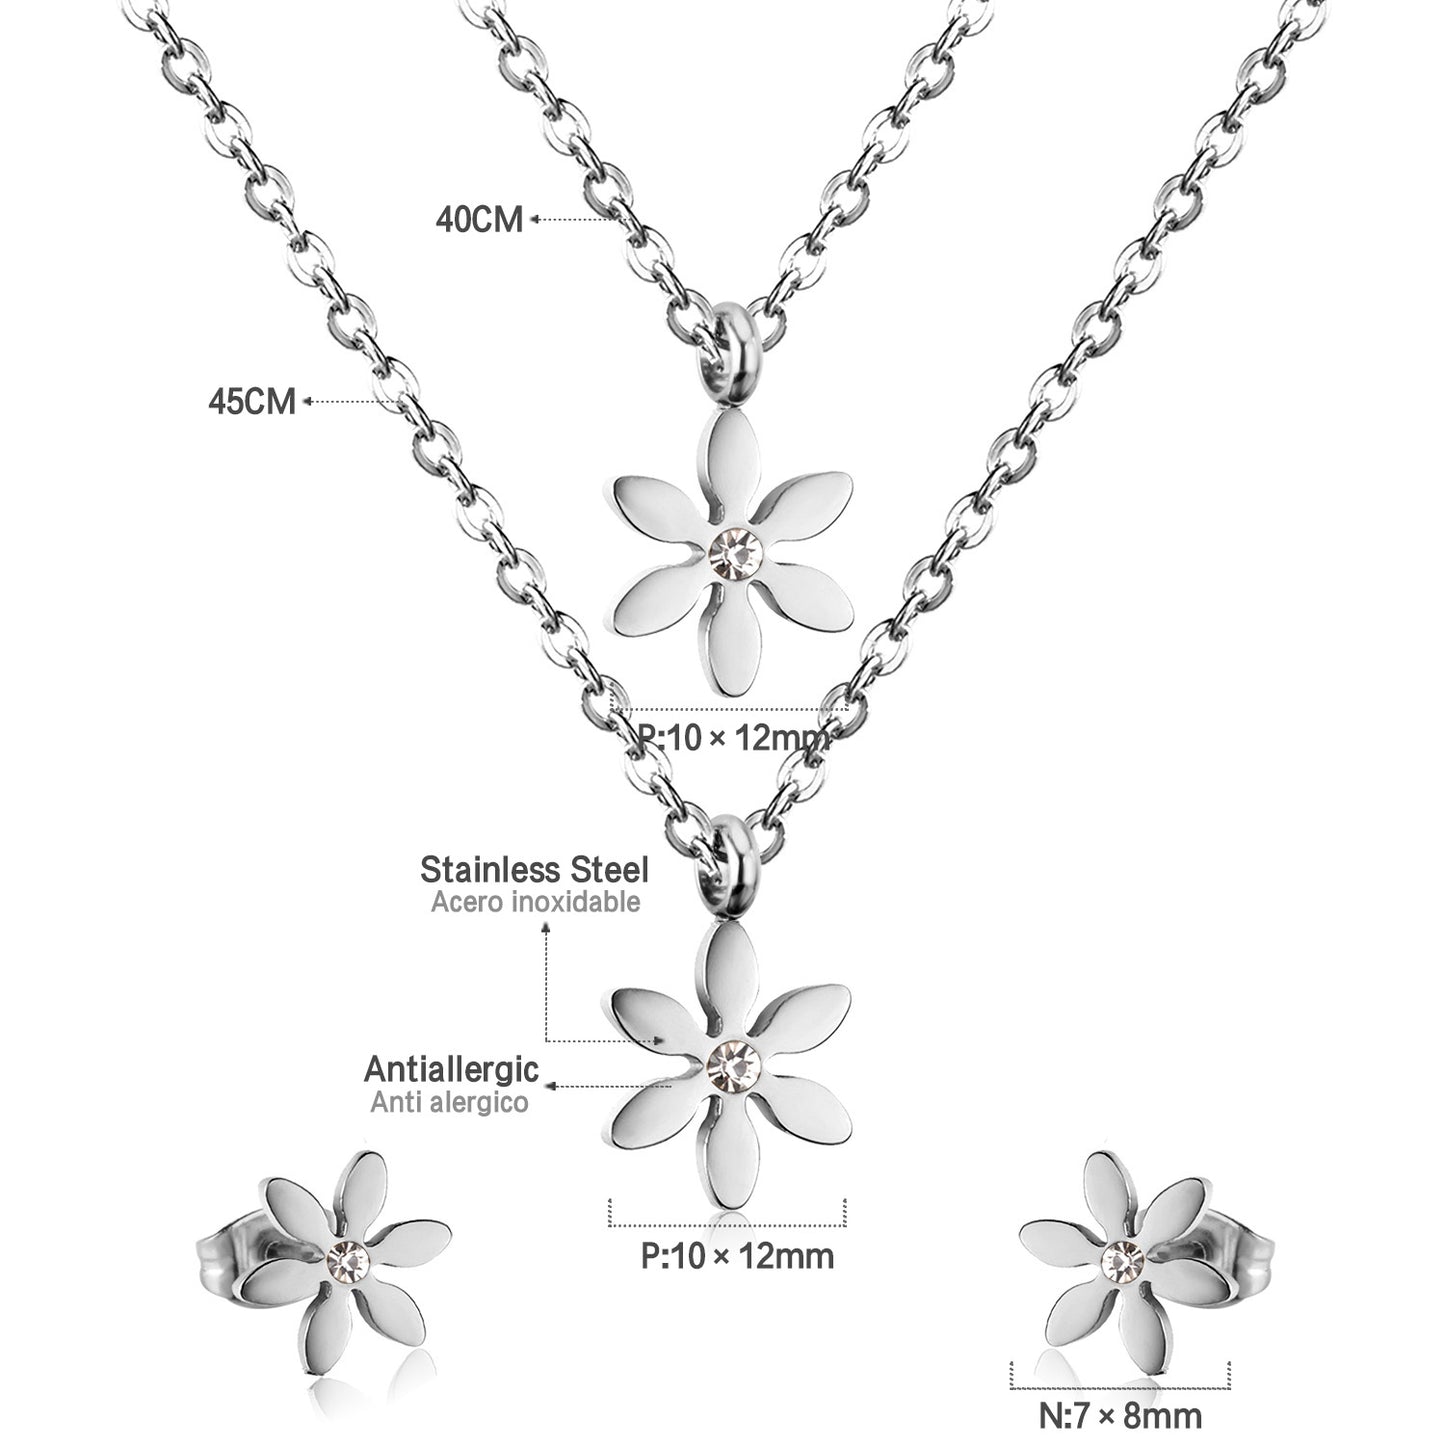 Children's, Teens' and Mothers' Necklace and Earrings Sets:  Surgical Steel, Layered Flower Necklace with Matching Earrings with CZ and Gift box.